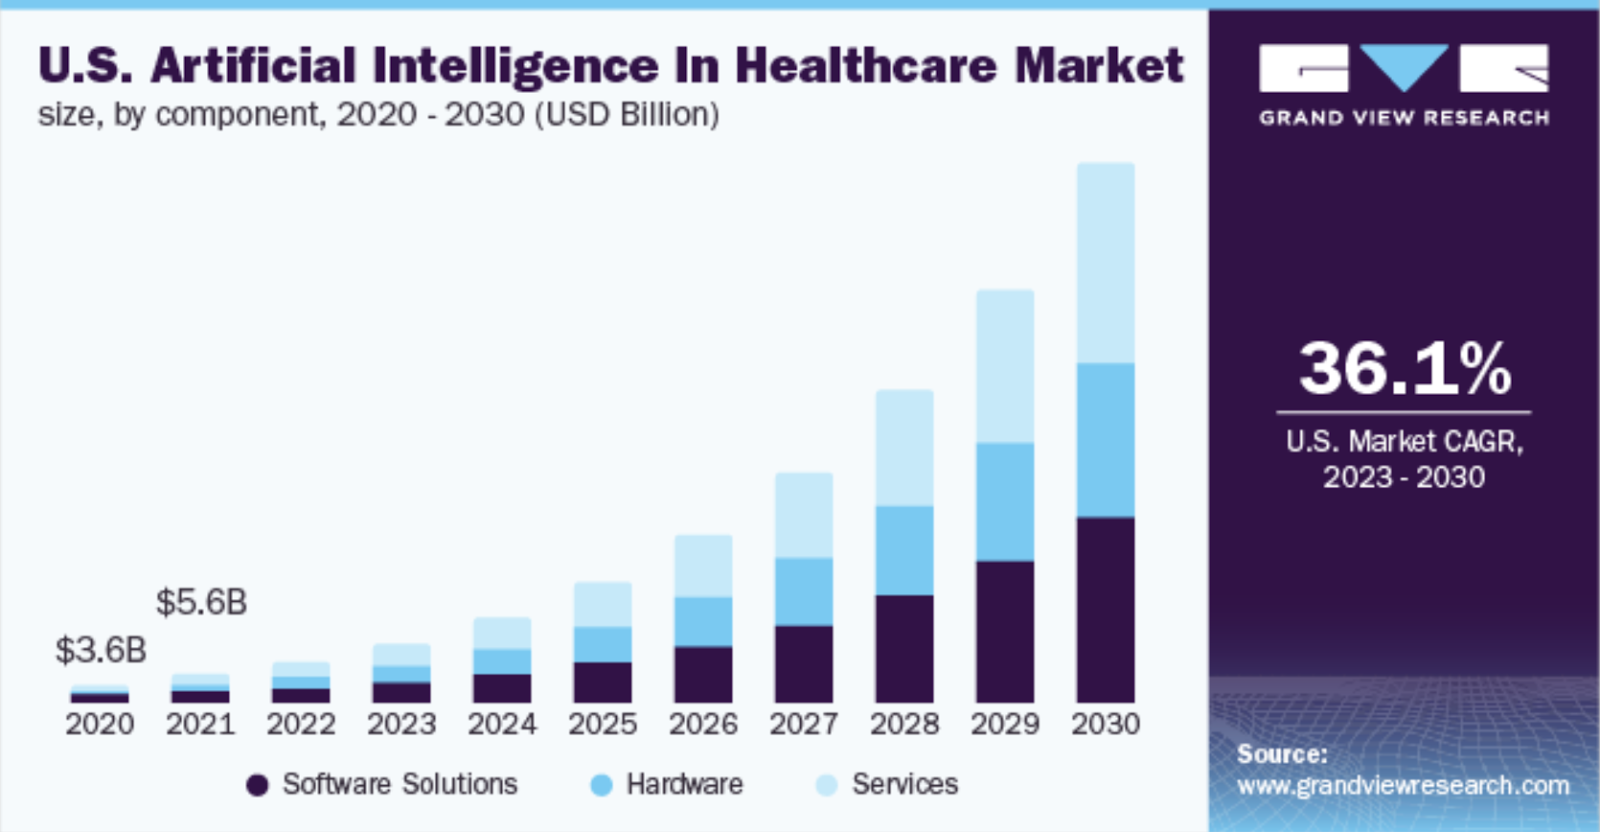 Chart comparing the AI in healthcare market for the US by component from 2020 to 2030.